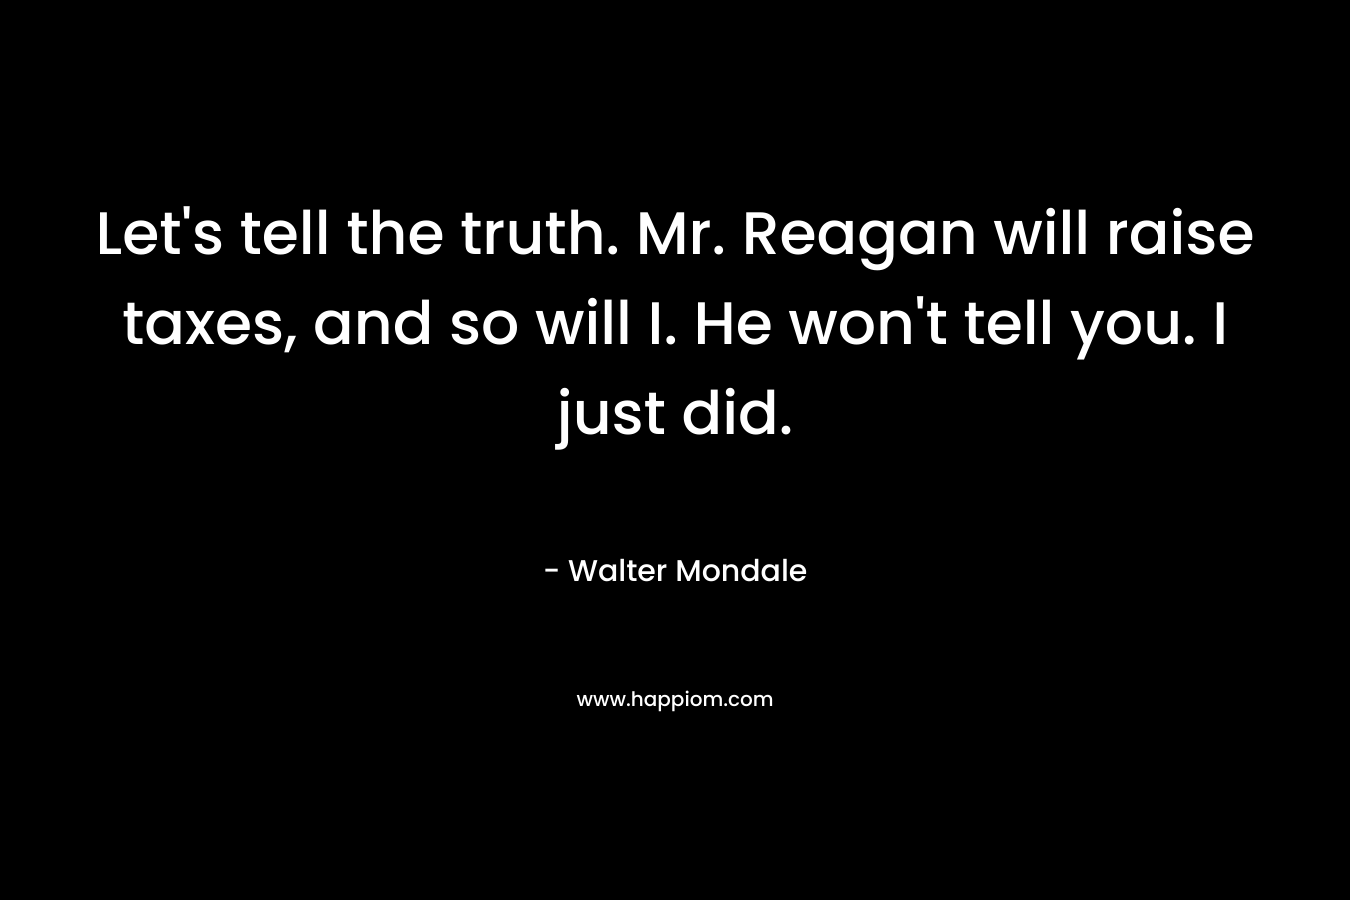 Let’s tell the truth. Mr. Reagan will raise taxes, and so will I. He won’t tell you. I just did. – Walter Mondale